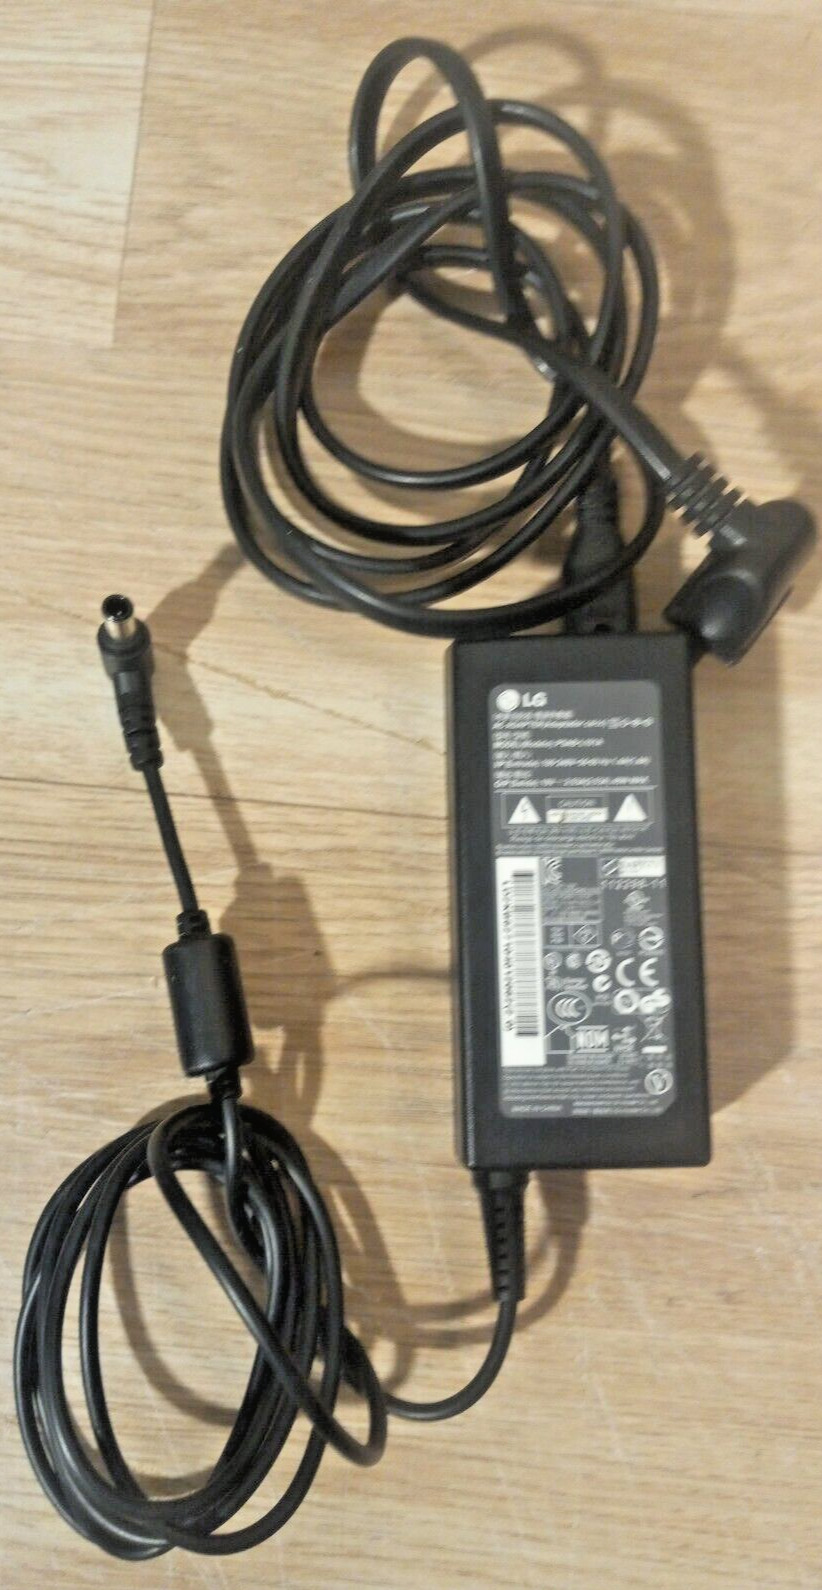 LG Ac Adapter PSAB-L101A PSABL101A DA-48F19 DC Charger Power Mains